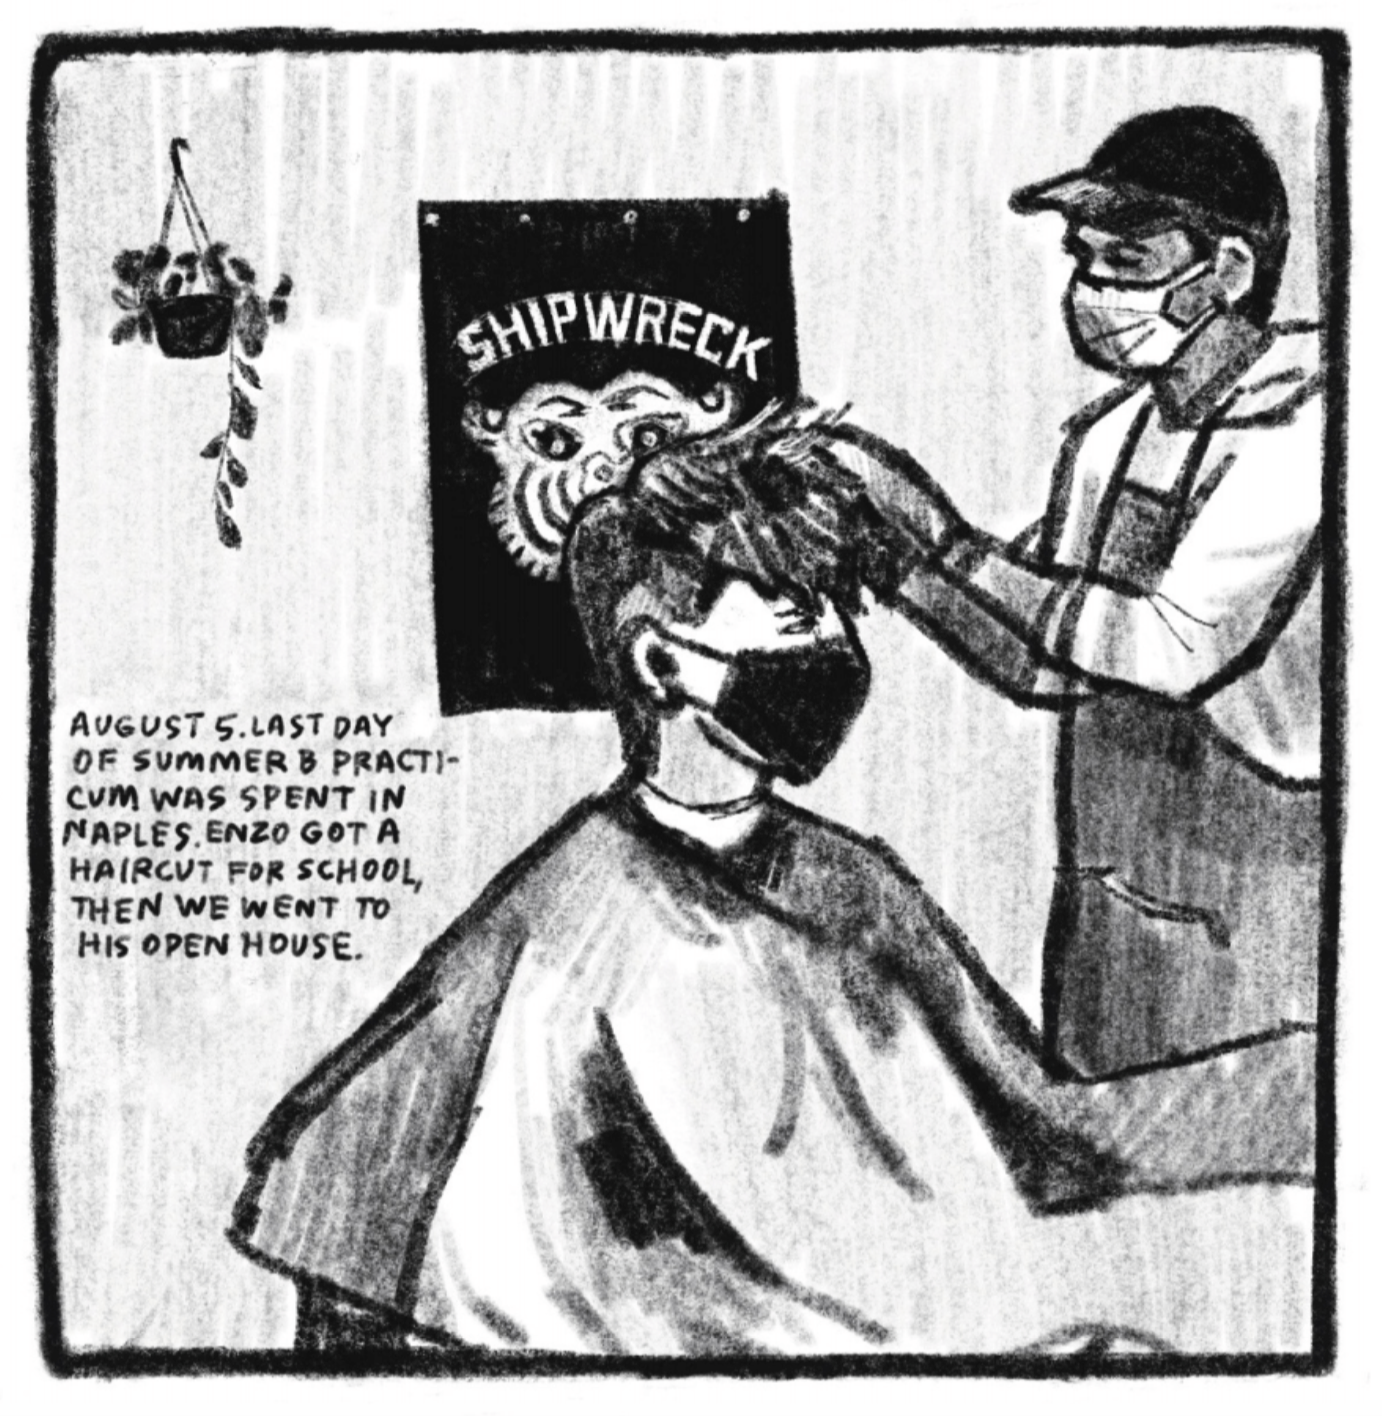 3. Enzo is getting his hair cut; he is wearing a barber cape and a covid face mask; a man wearing a baseball cap, an apron over a three quarter sleeve shirt, and a surgical mask is cutting his hair. He has left the top longer, but the sides are shaved, and right around his ears is an even closer shave. A graphic poster with the word â€œSHIPWRECKâ€ hangs on the wall behind them, next to a hanging potted plant. â€œAugust 5. Last day of summer B practicum was spent in Naples. Enzo got a haircut for school, then we went to his open house.â€